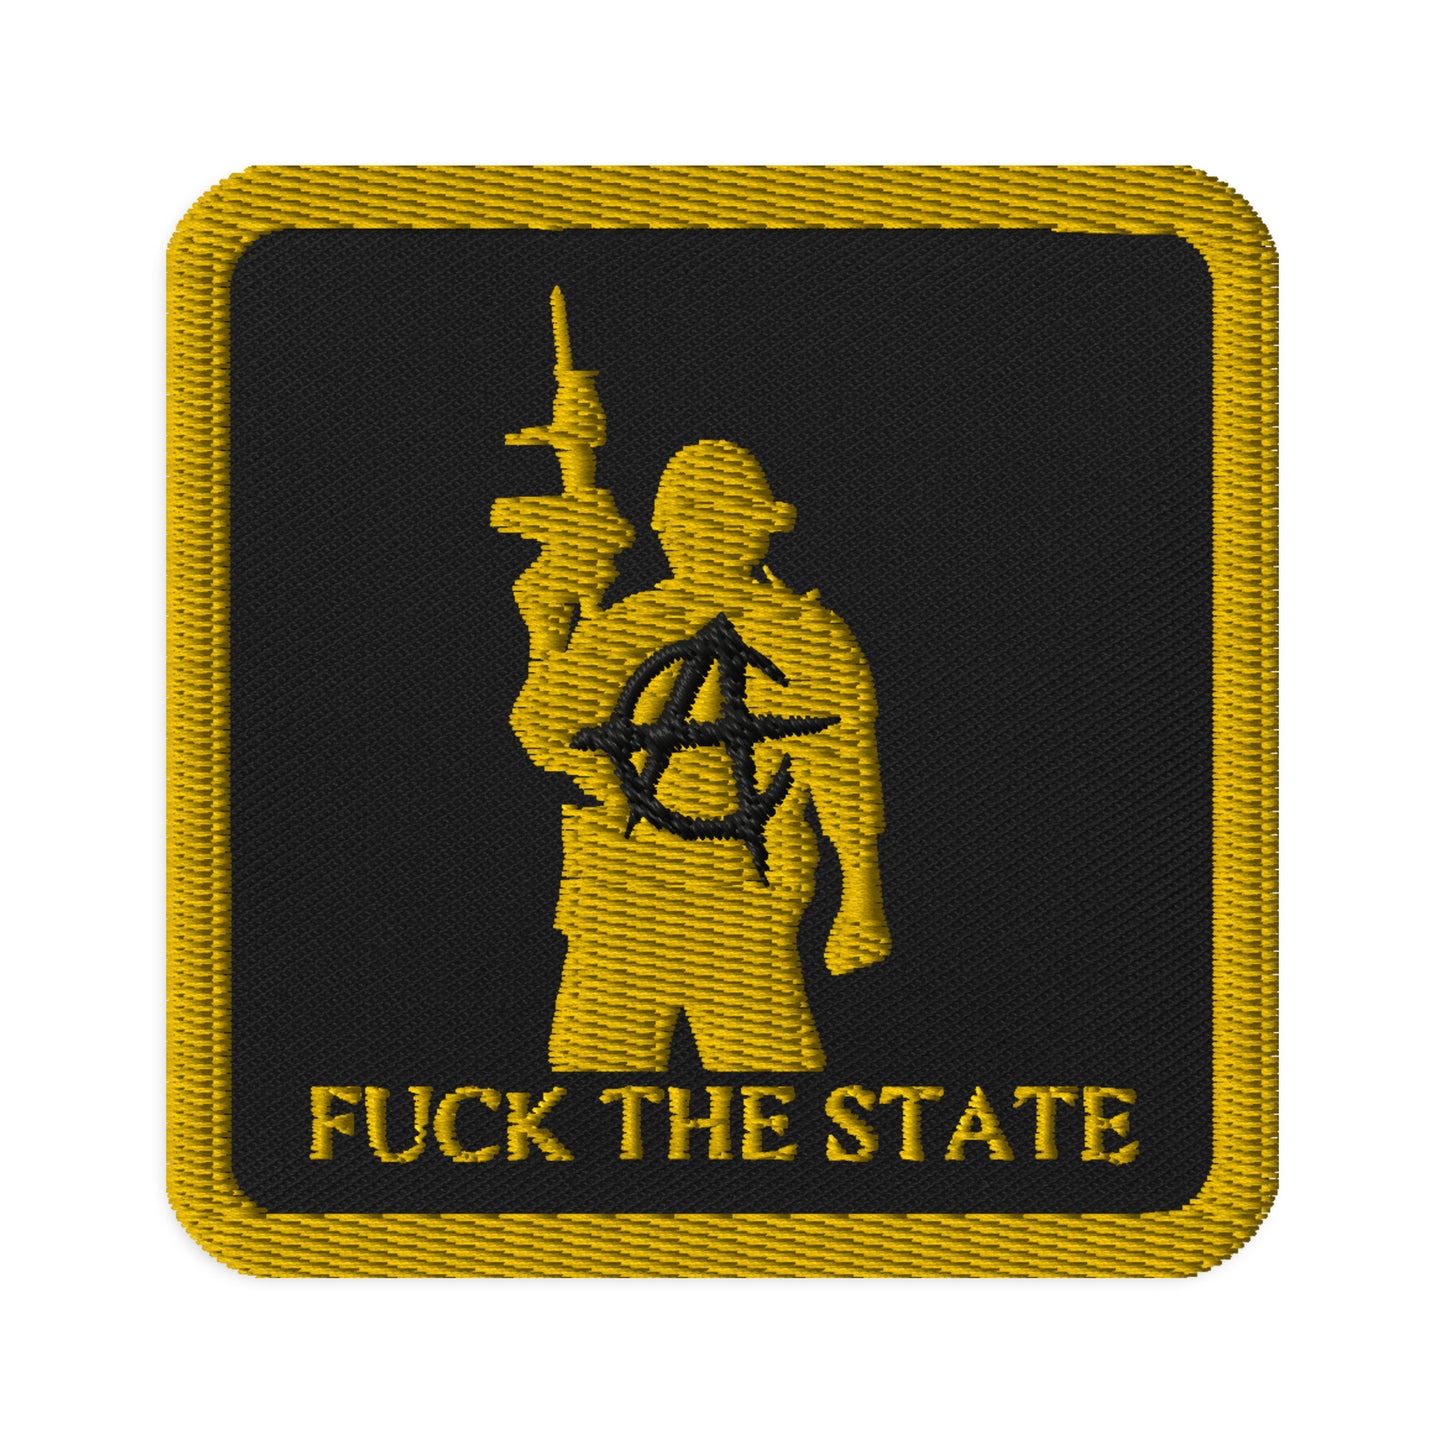 FUCK THE STATE Gold By @AncapAir Patch Square 3″×3″